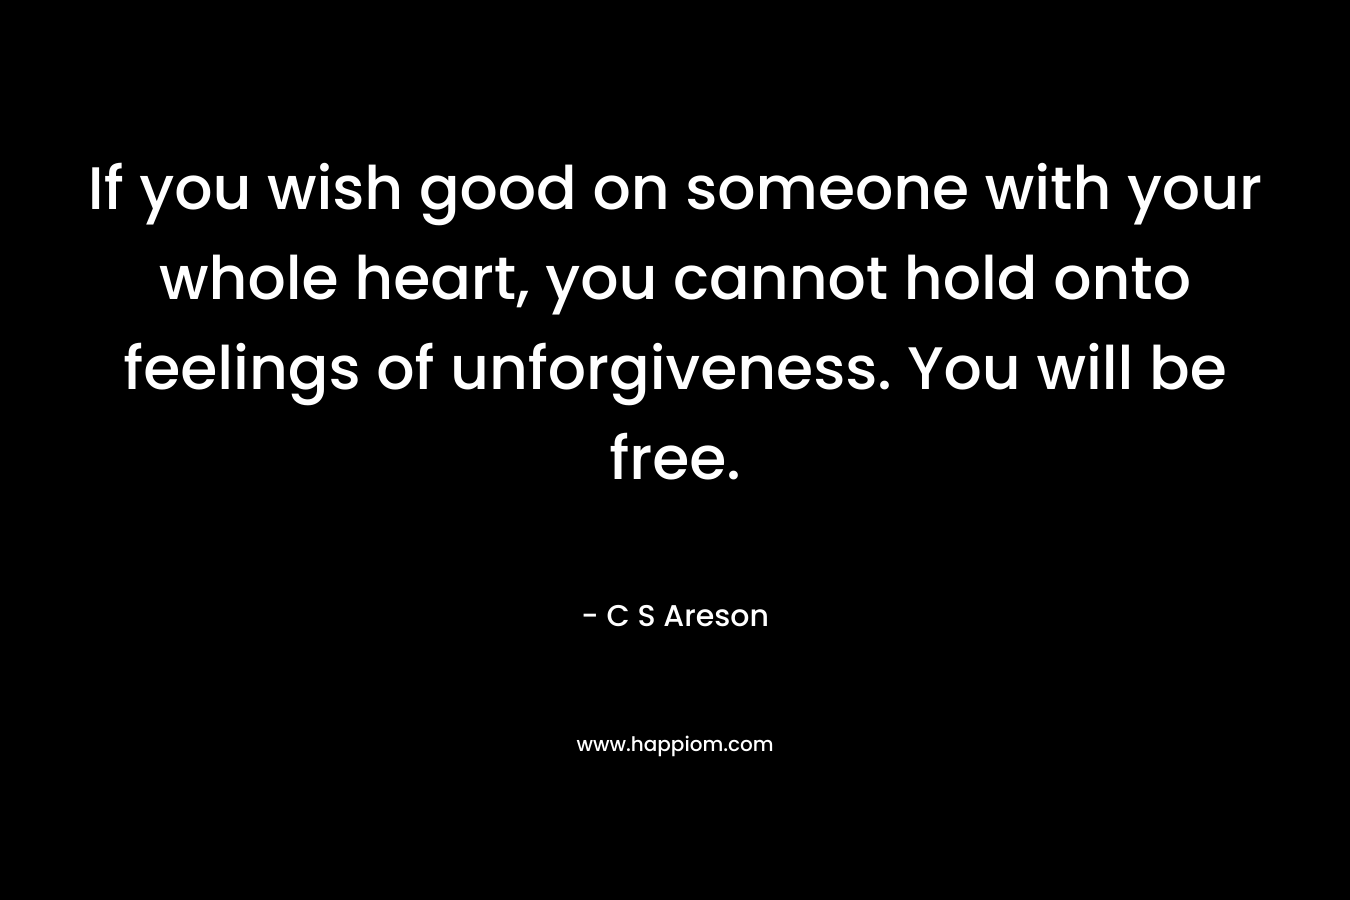 If you wish good on someone with your whole heart, you cannot hold onto feelings of unforgiveness. You will be free.